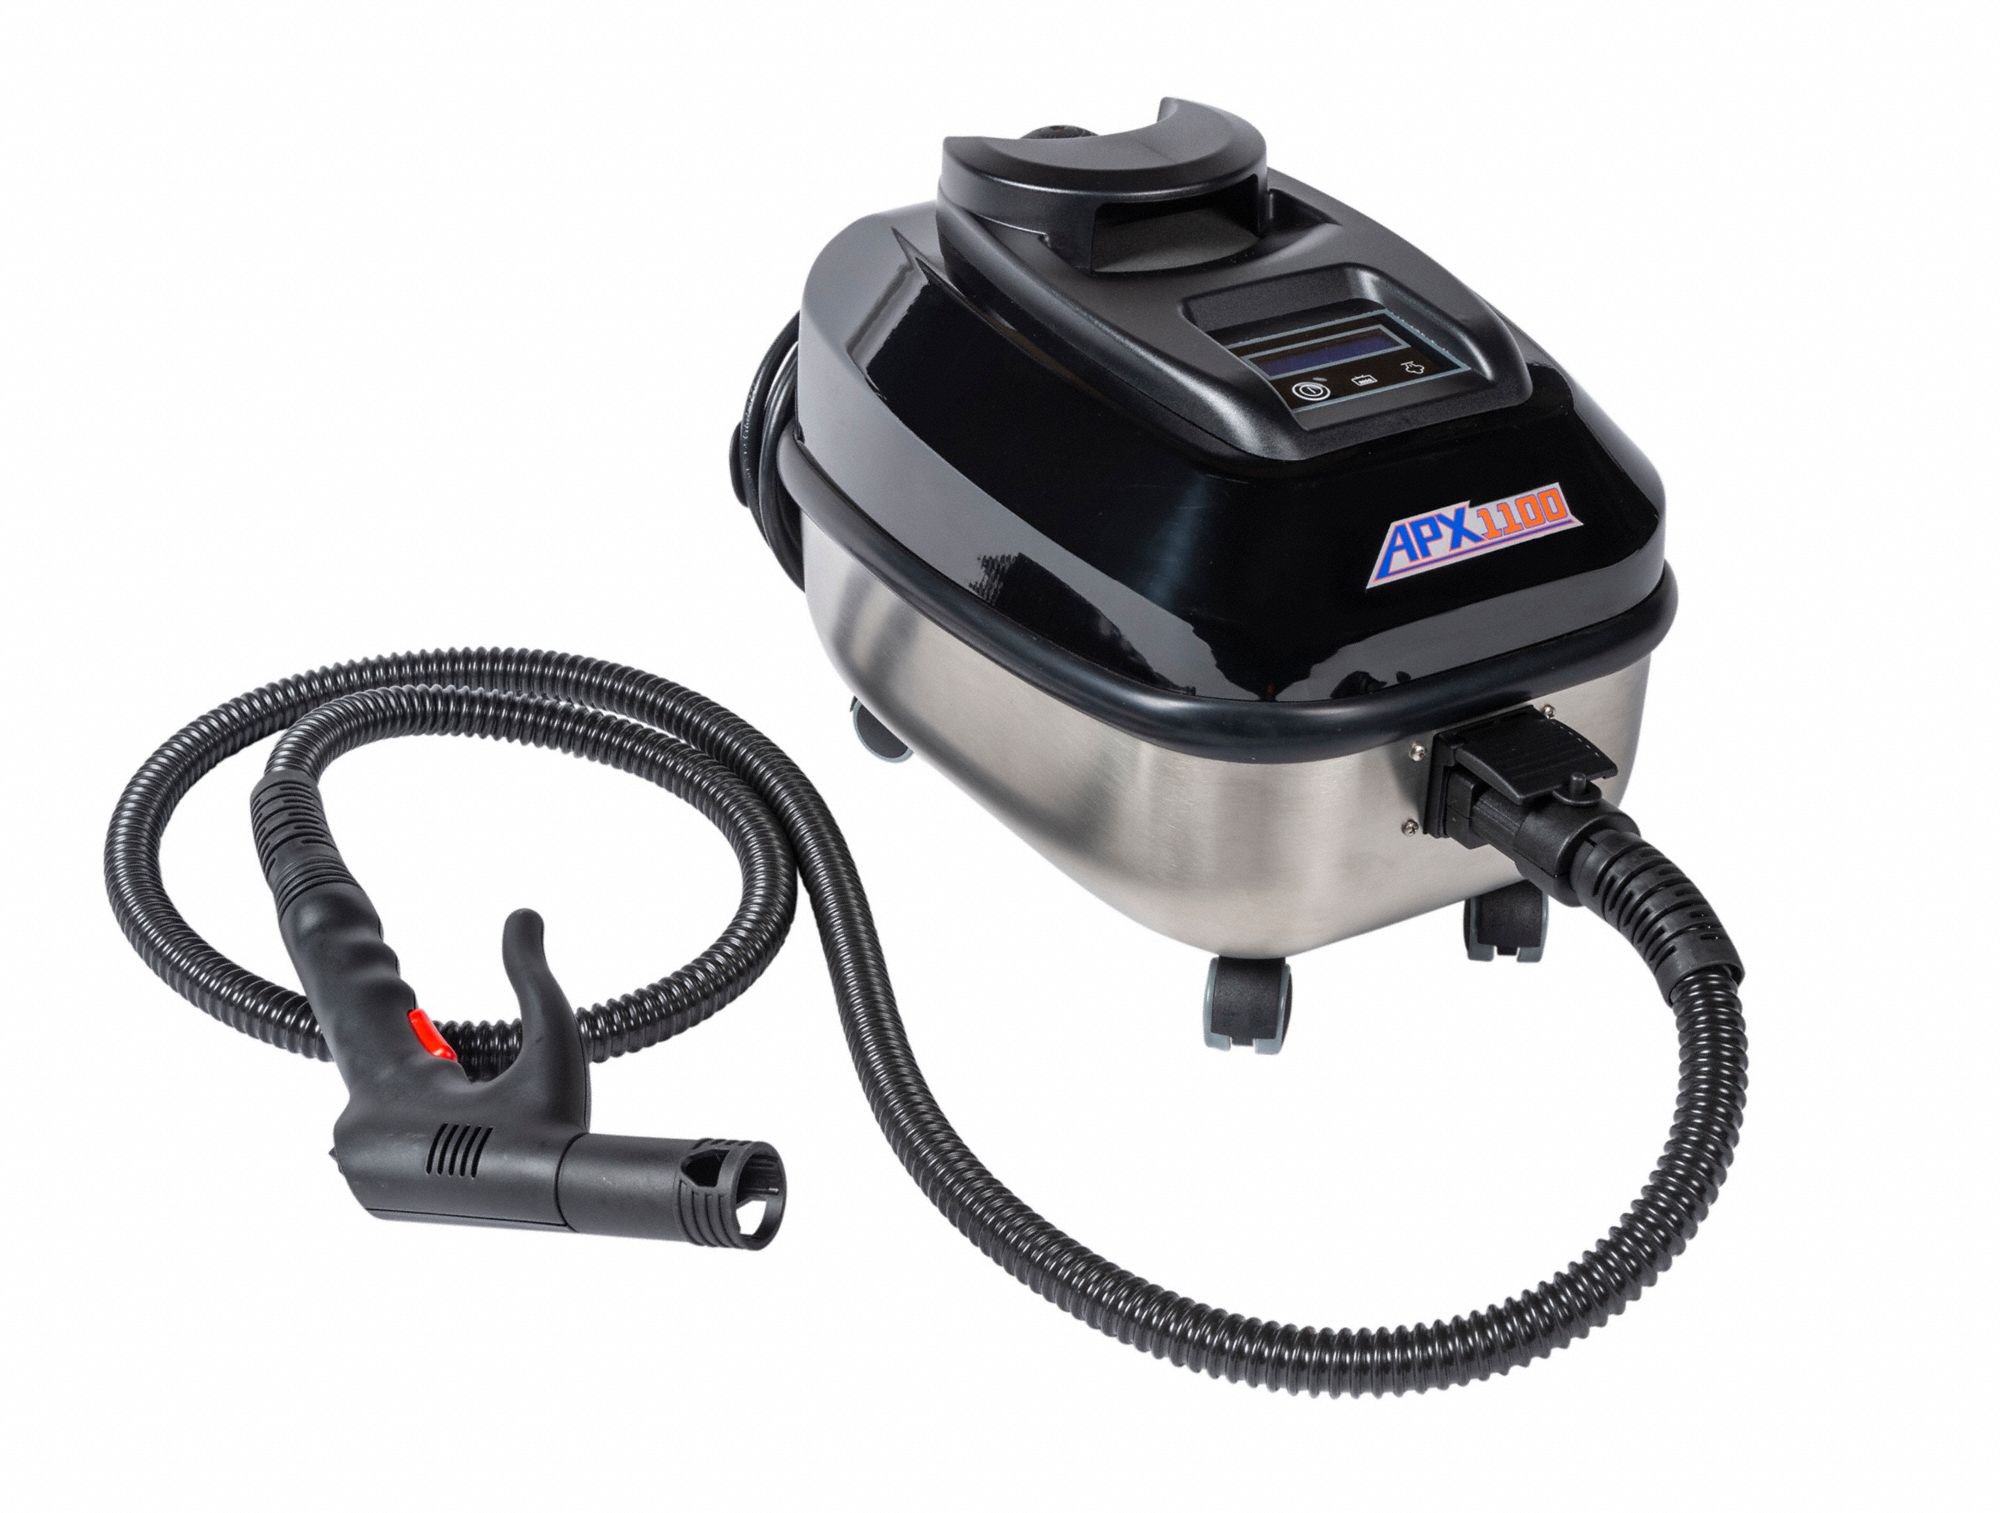 Portable Dry Steam Cleaner, Stainless Steel, 1650W, Dry Steam Cleaners